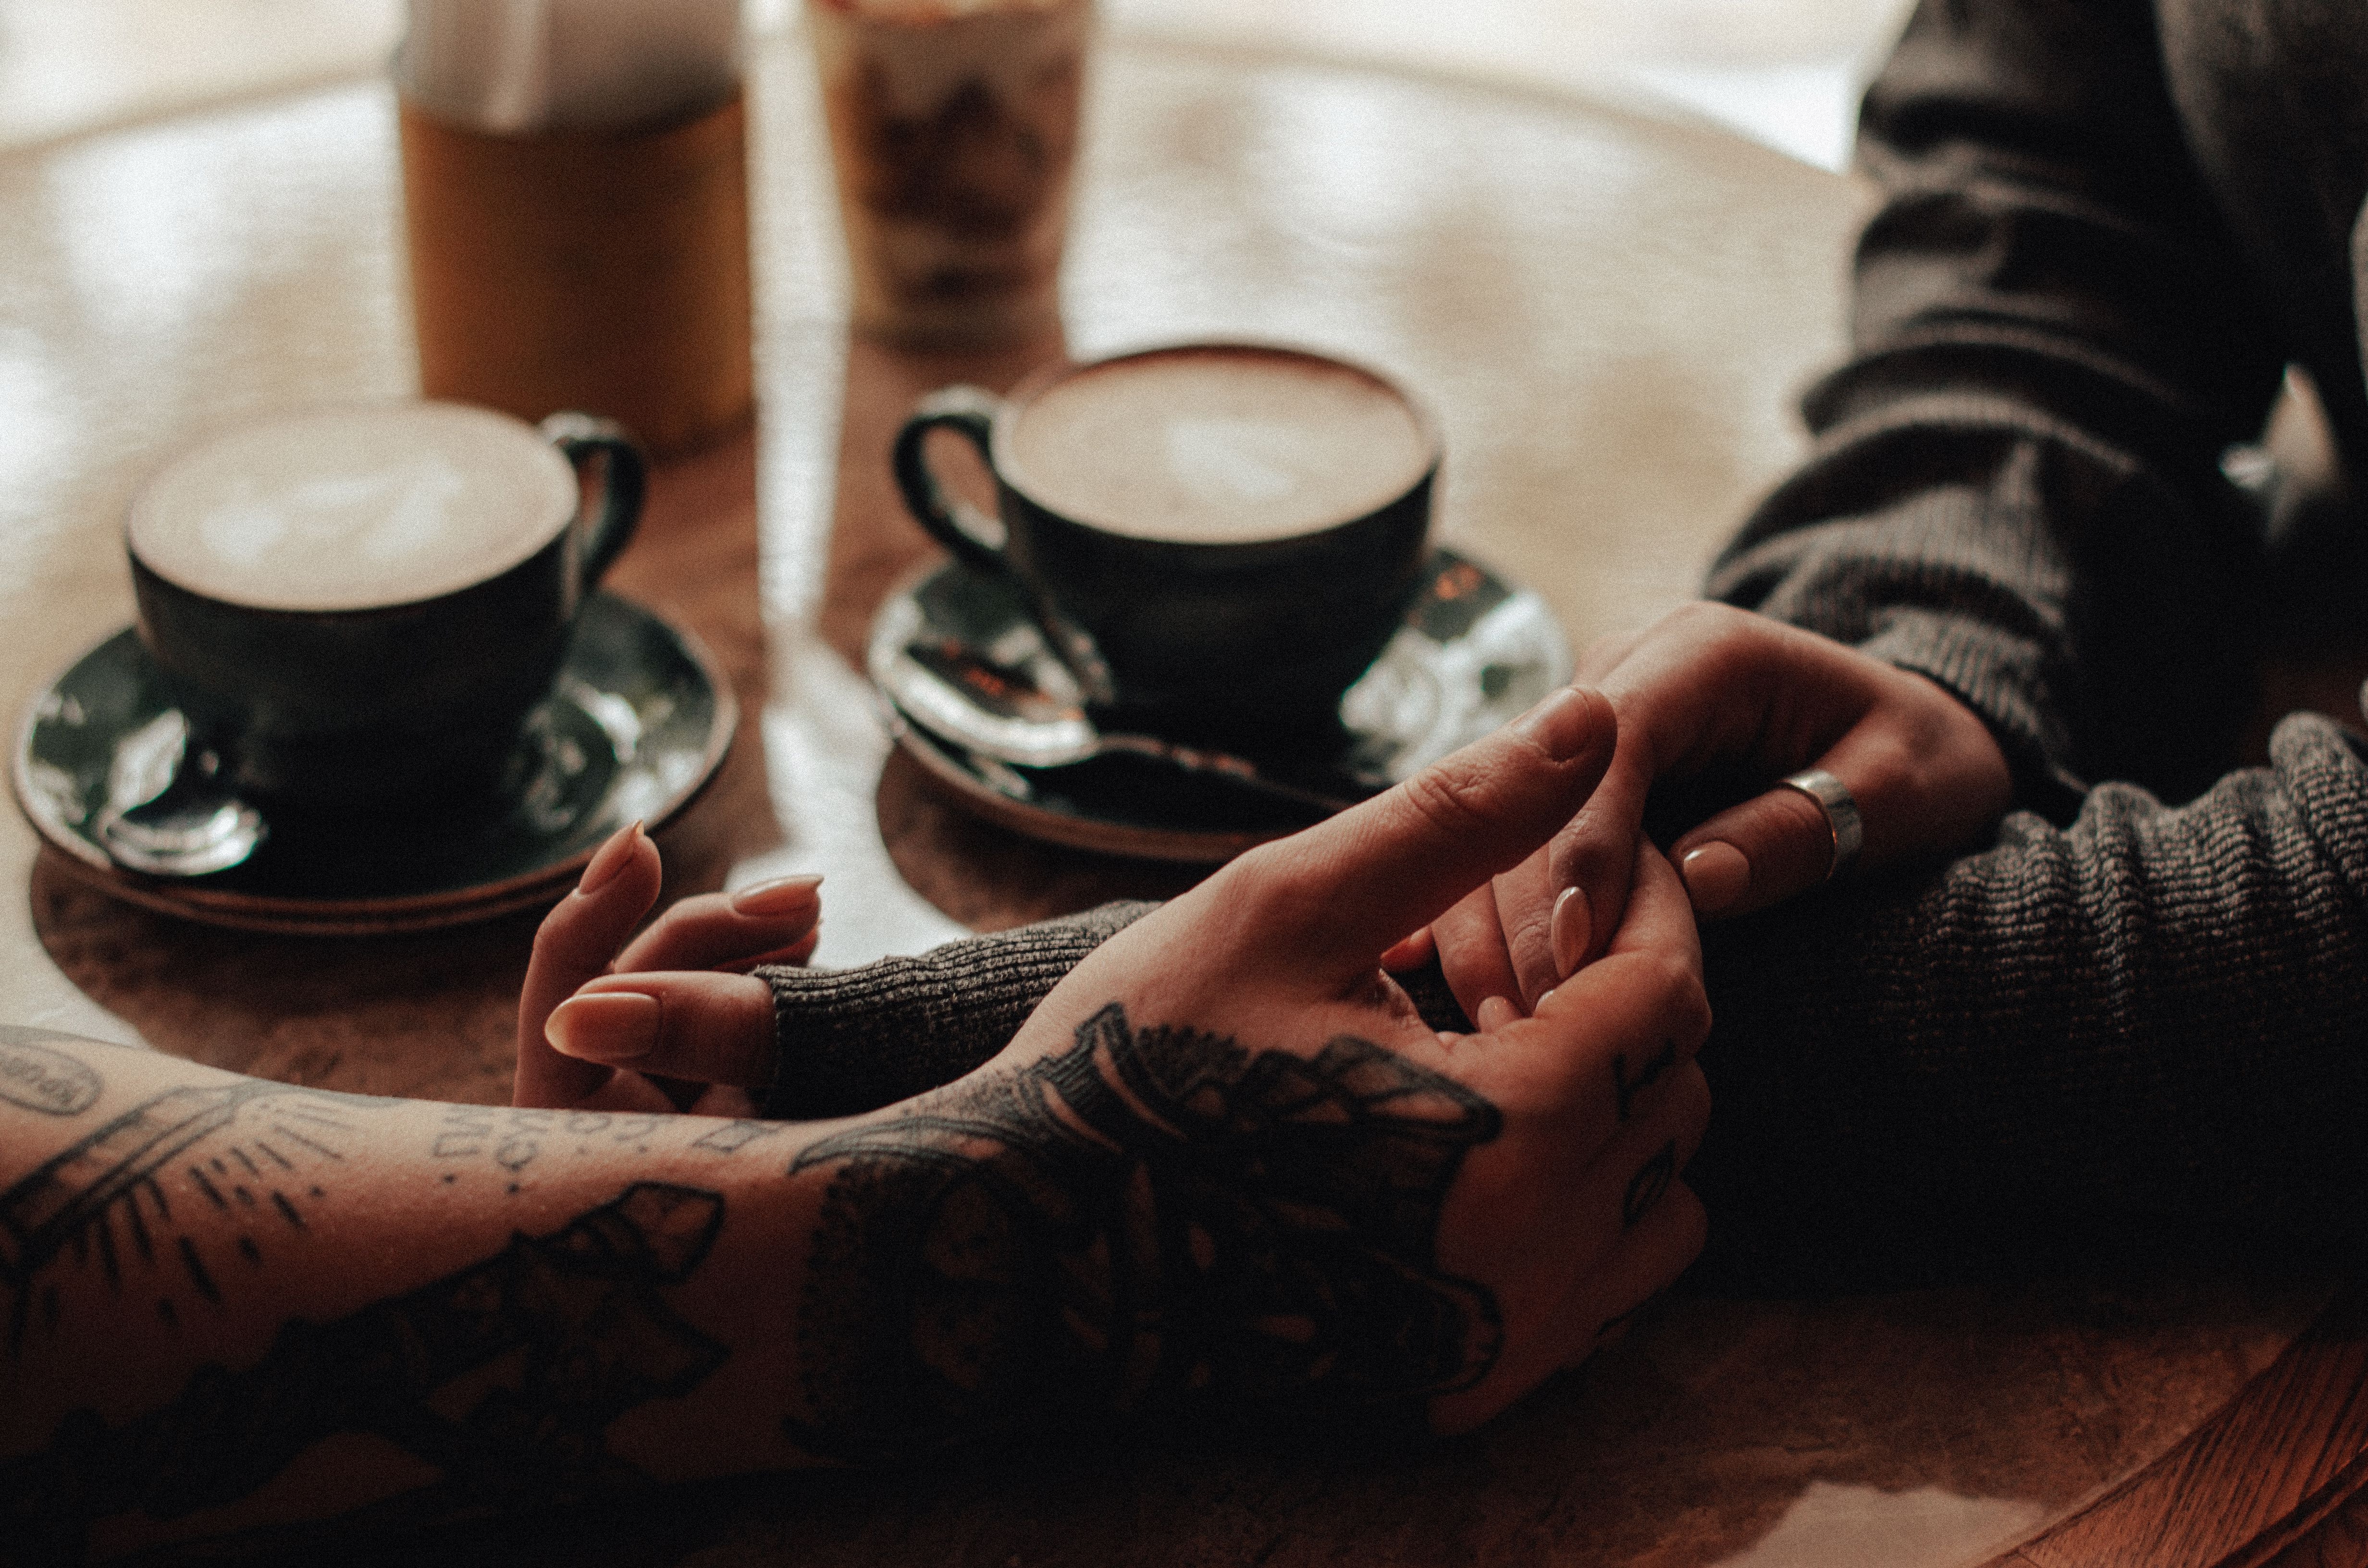 Two individuals holding hands over a table. | Source: Pexels